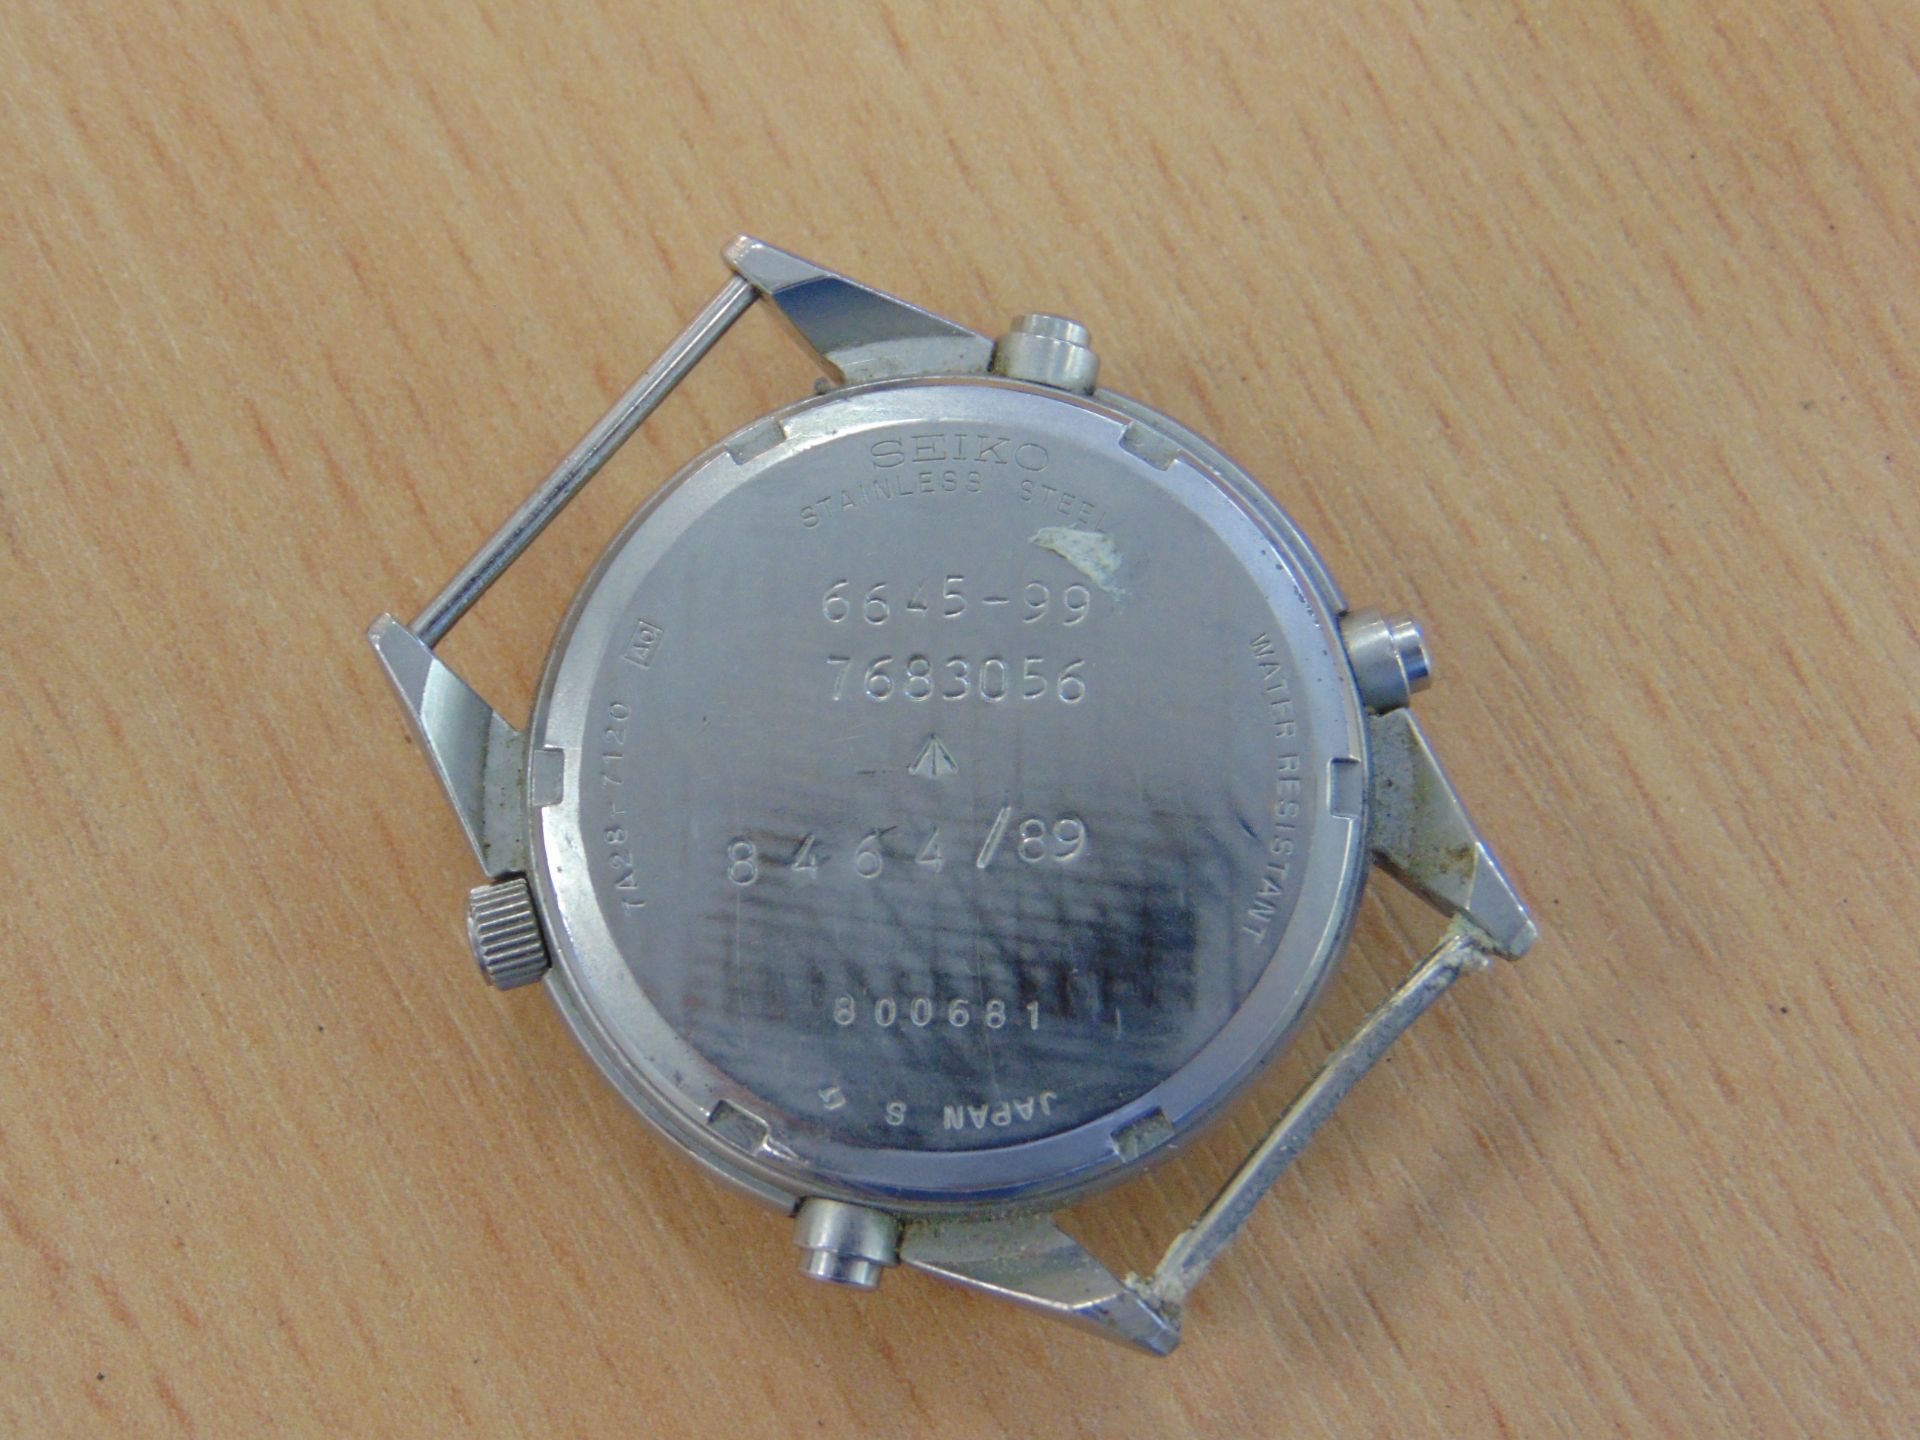 SEIKO GEN 1 PILOTS CHRONO RAF ISSUE WATCH NATO MARKINGS DATED 1989 AS ISSUED TO HARRIER FORCE - Image 6 of 10